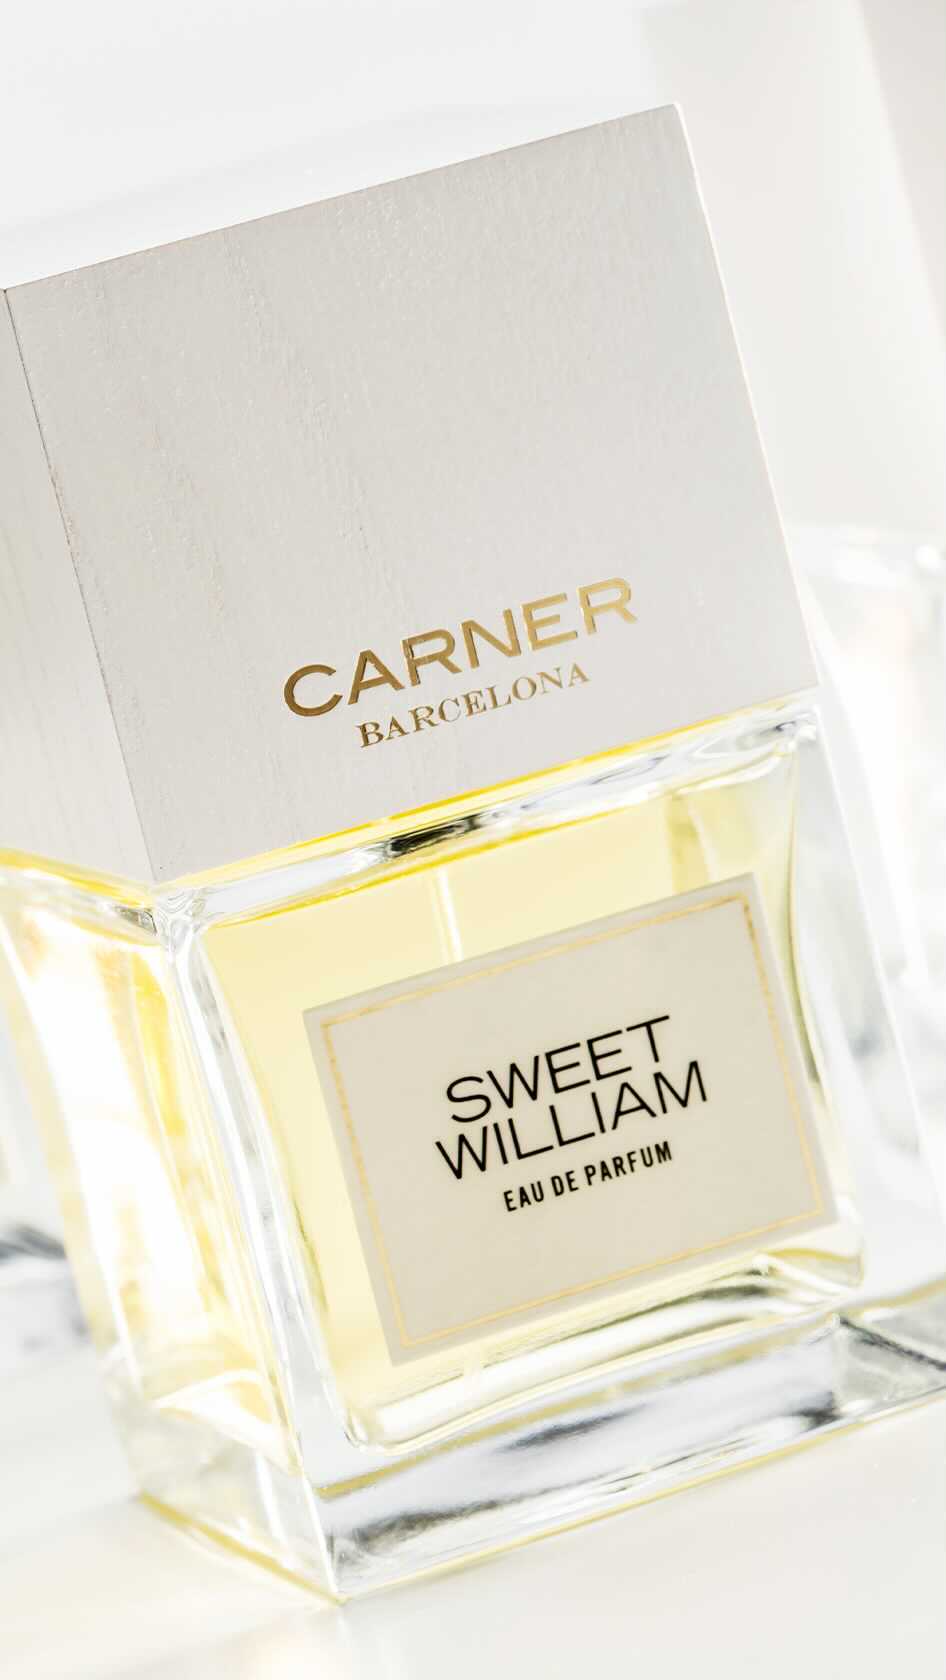 CARNER BARCELONA • Perfumes - Sara Carner, our founder, talks about Sweet William 🤍

#sweetwilliam #igtv #carnerbarcelona #carner #barcelona #nicheperfume #fragrance #perfume